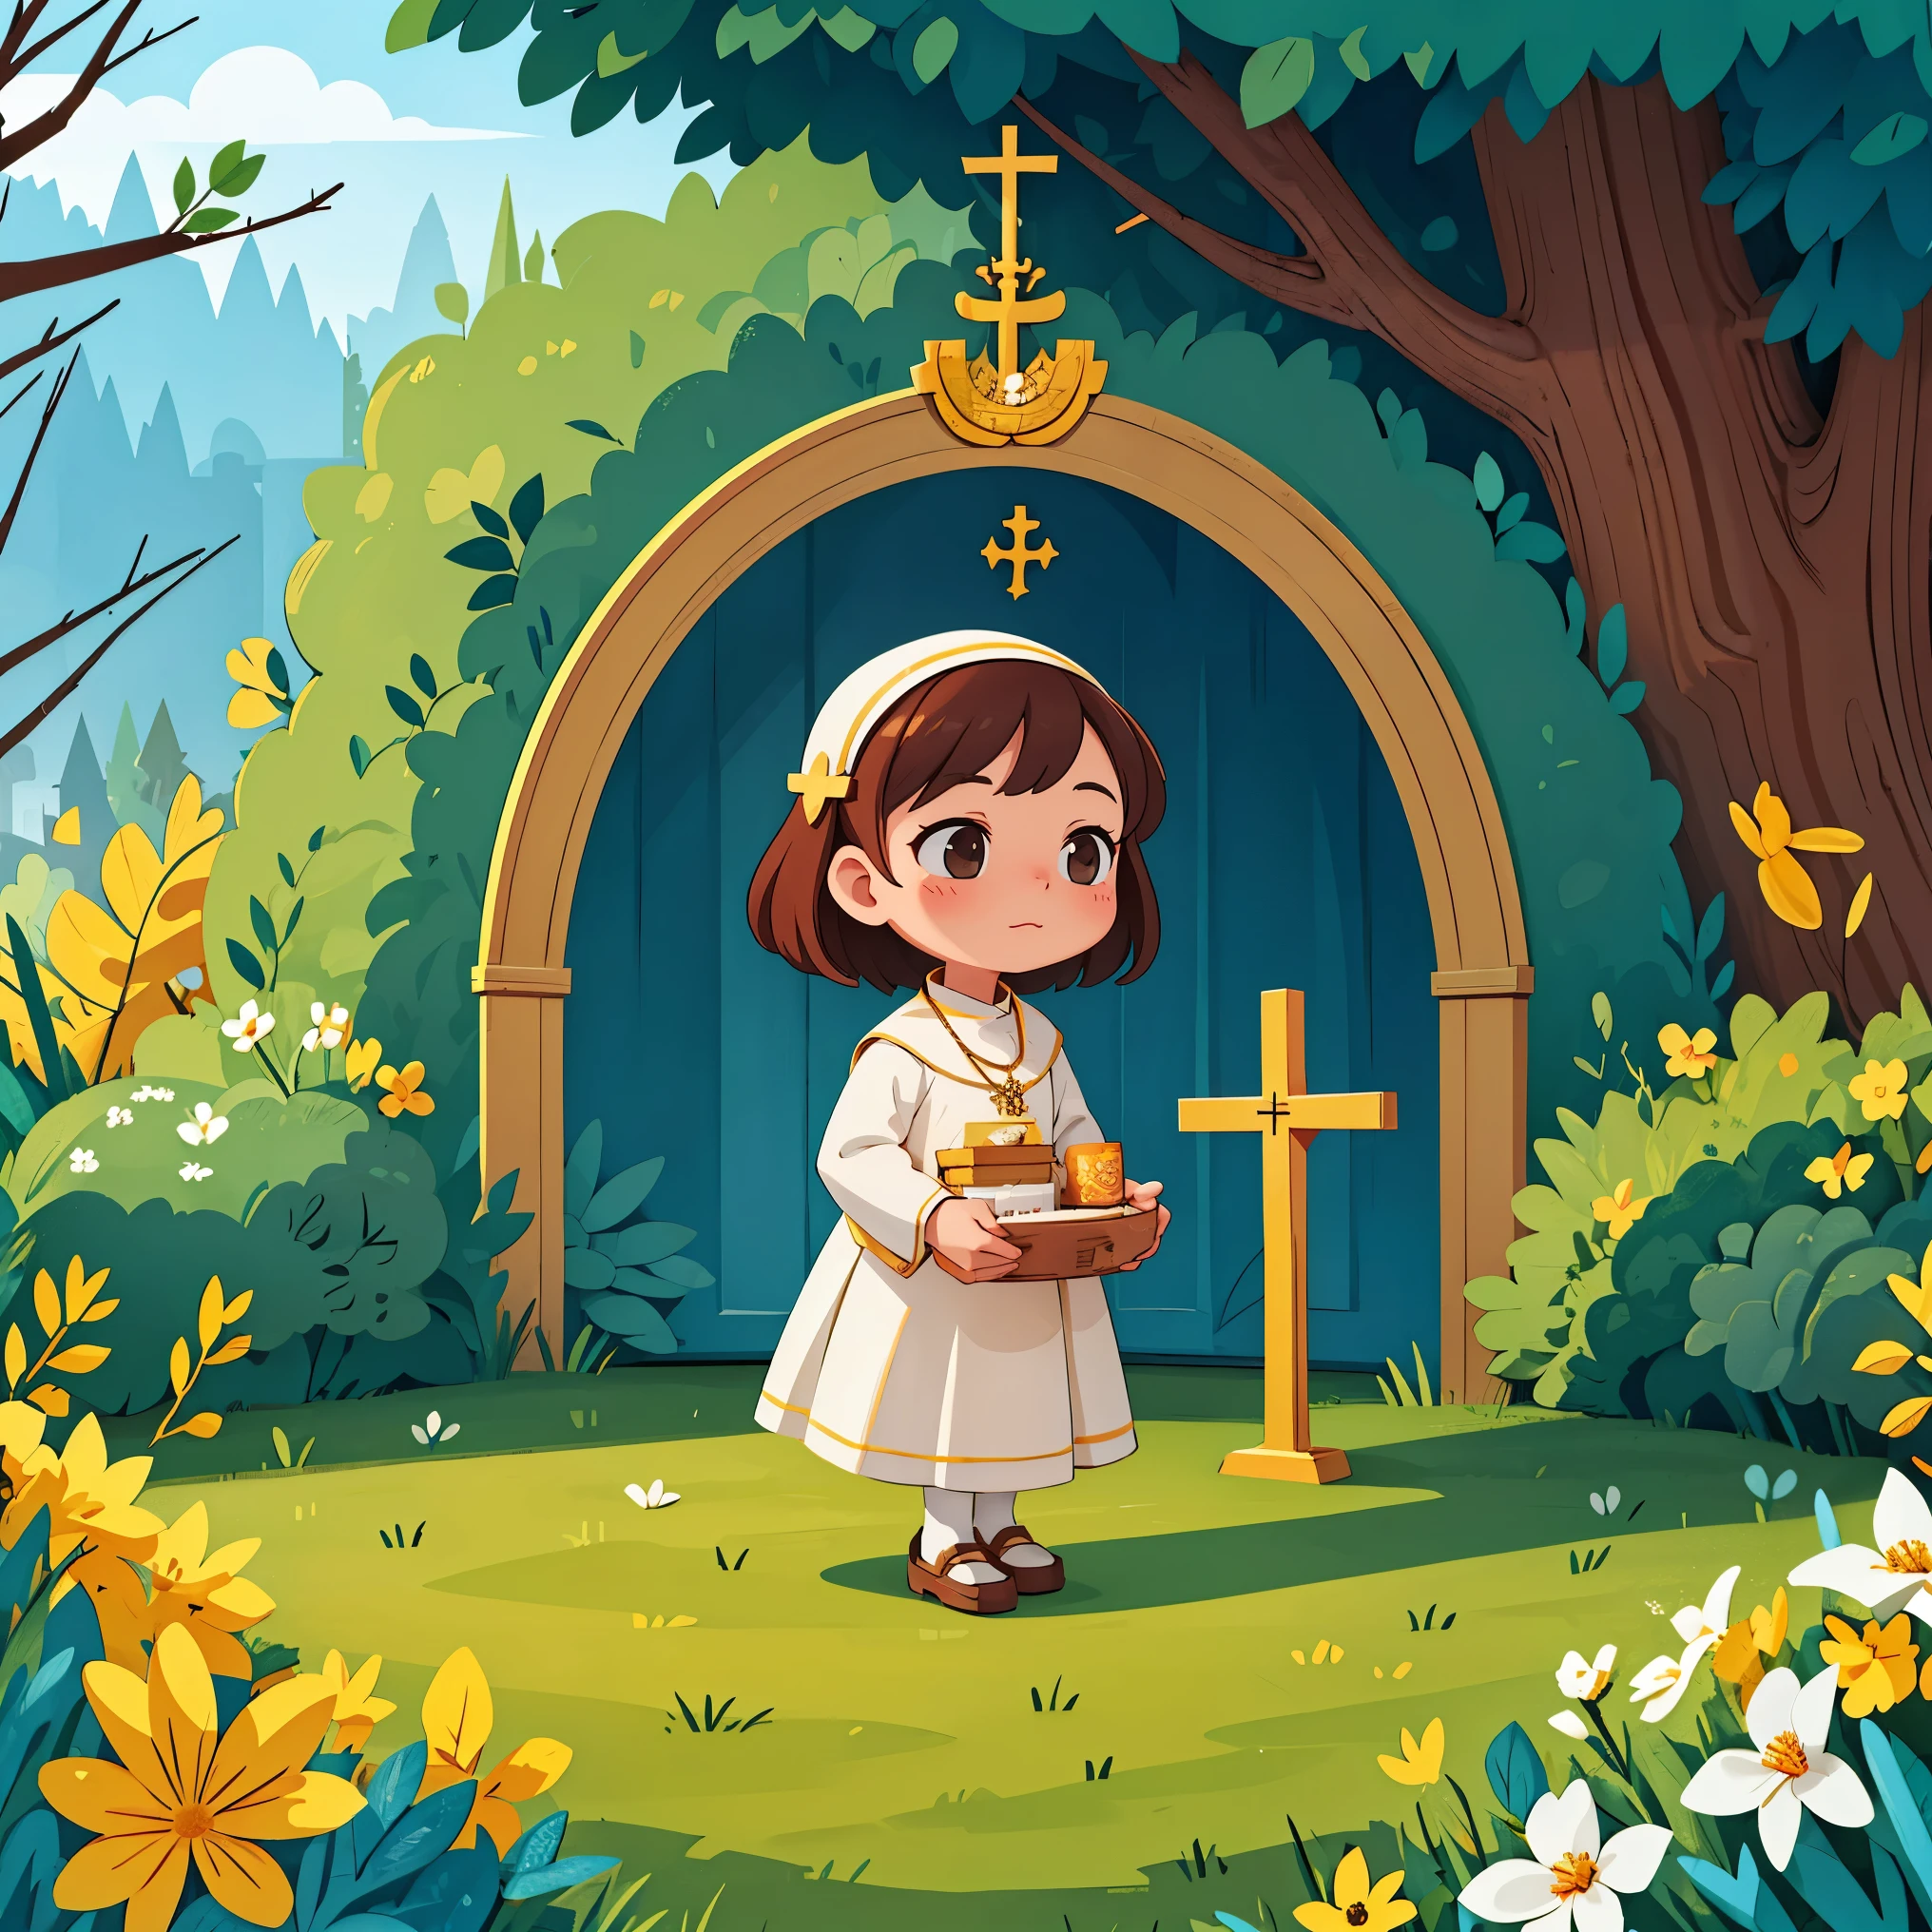 A girl during her first communion at a Catholic church, with beautiful brown hair. (best quality, detailed), church setting, traditional Catholic attire, serene expression, golden sunlight, elegant dress, floral decorations, specific architectural details, cross necklace, communion host.